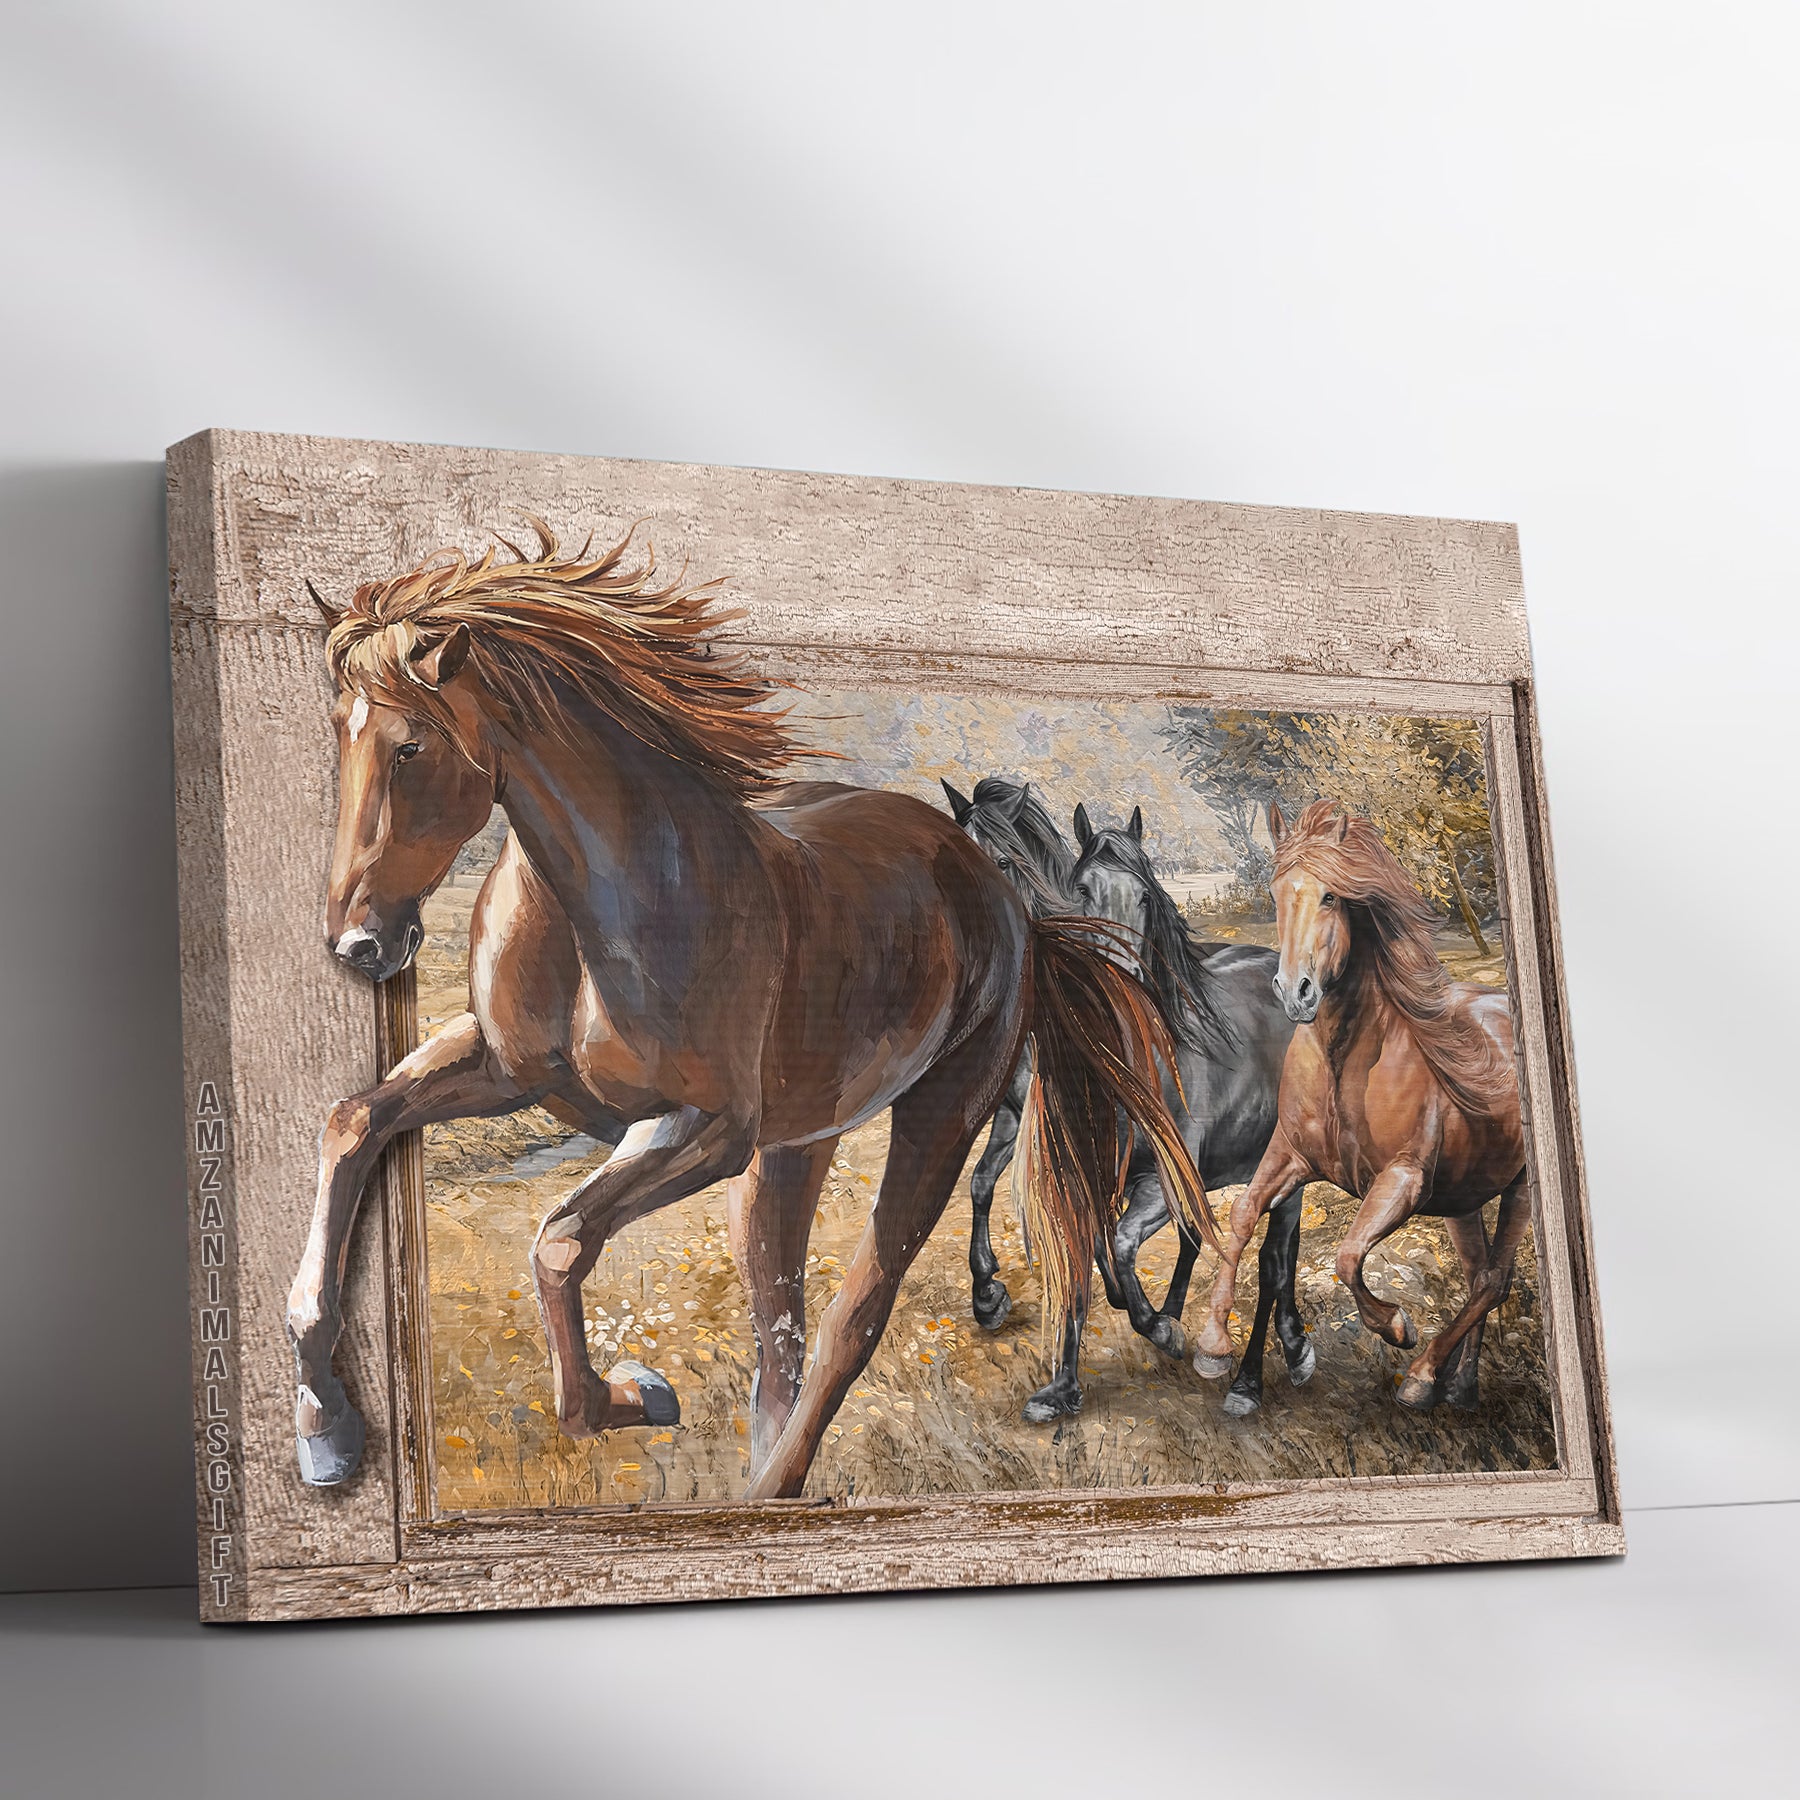 Jesus Premium Wrapped Landscape Canvas - American Quarter Horse, Running Horse, Meadow Land - Perfect Gift For Christian, Horse Lovers